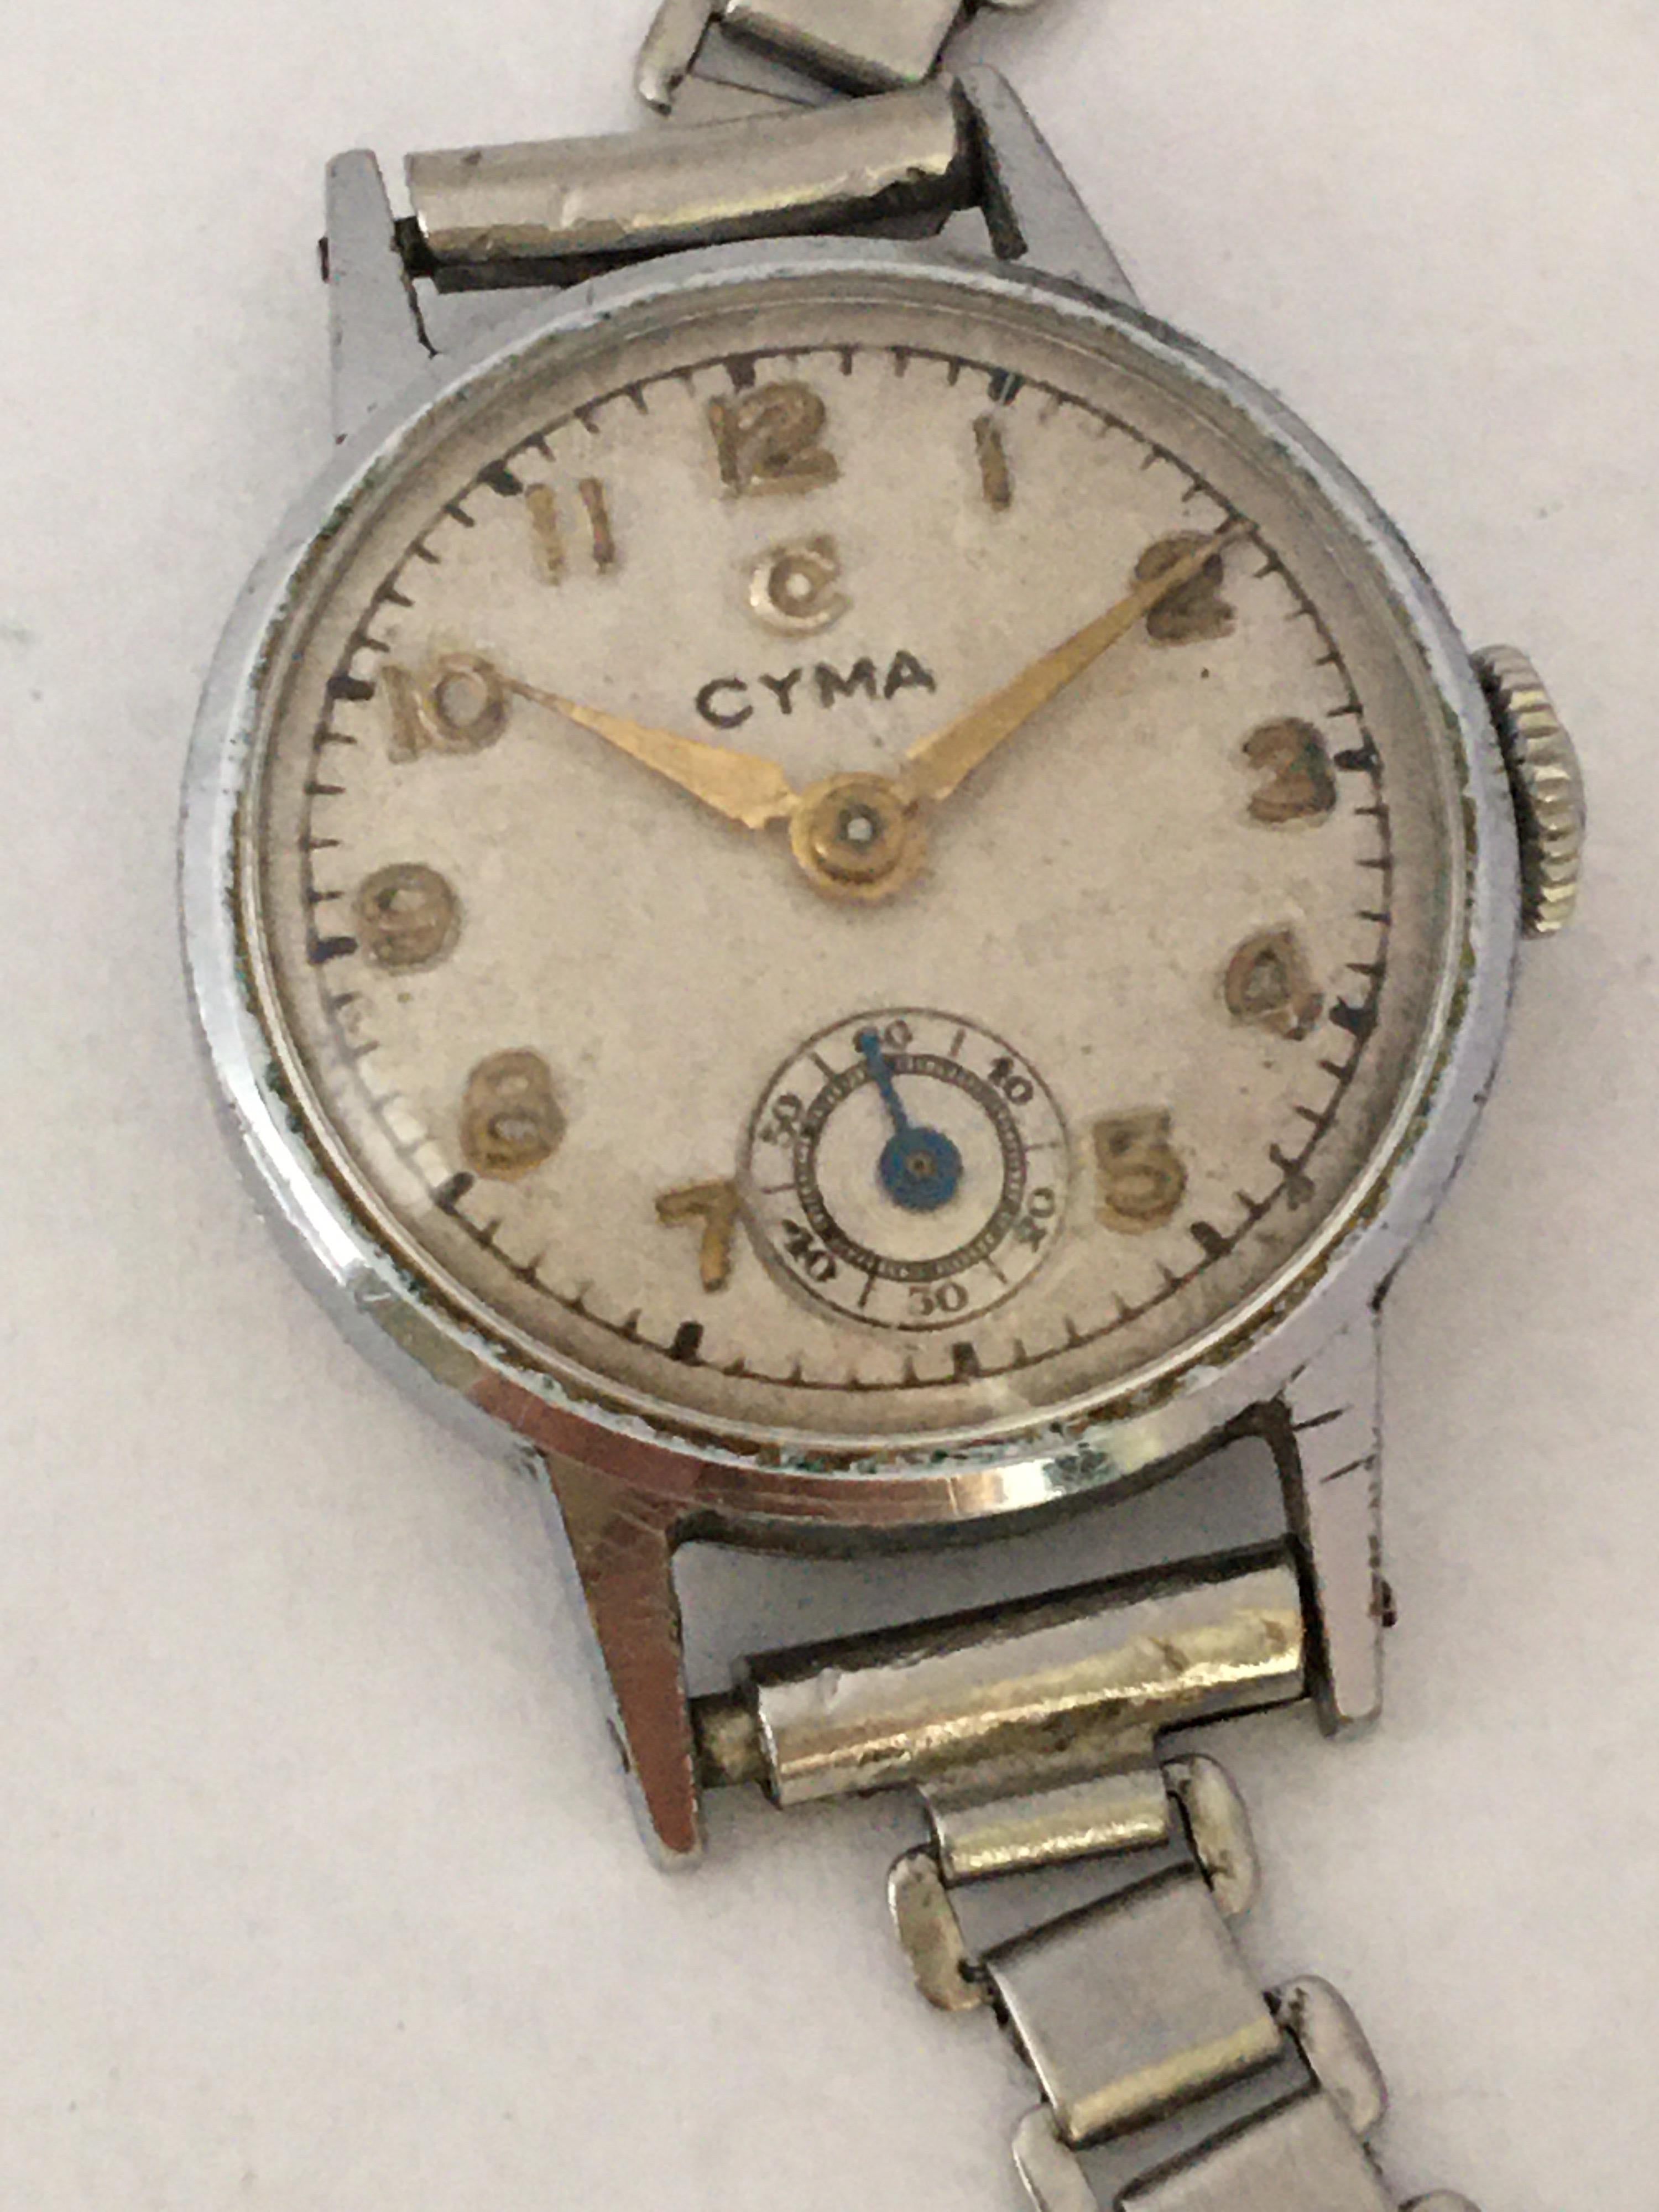 1940s Vintage Stainless Steel Ladies Cyma Mechanical Watch In Good Condition For Sale In Carlisle, GB